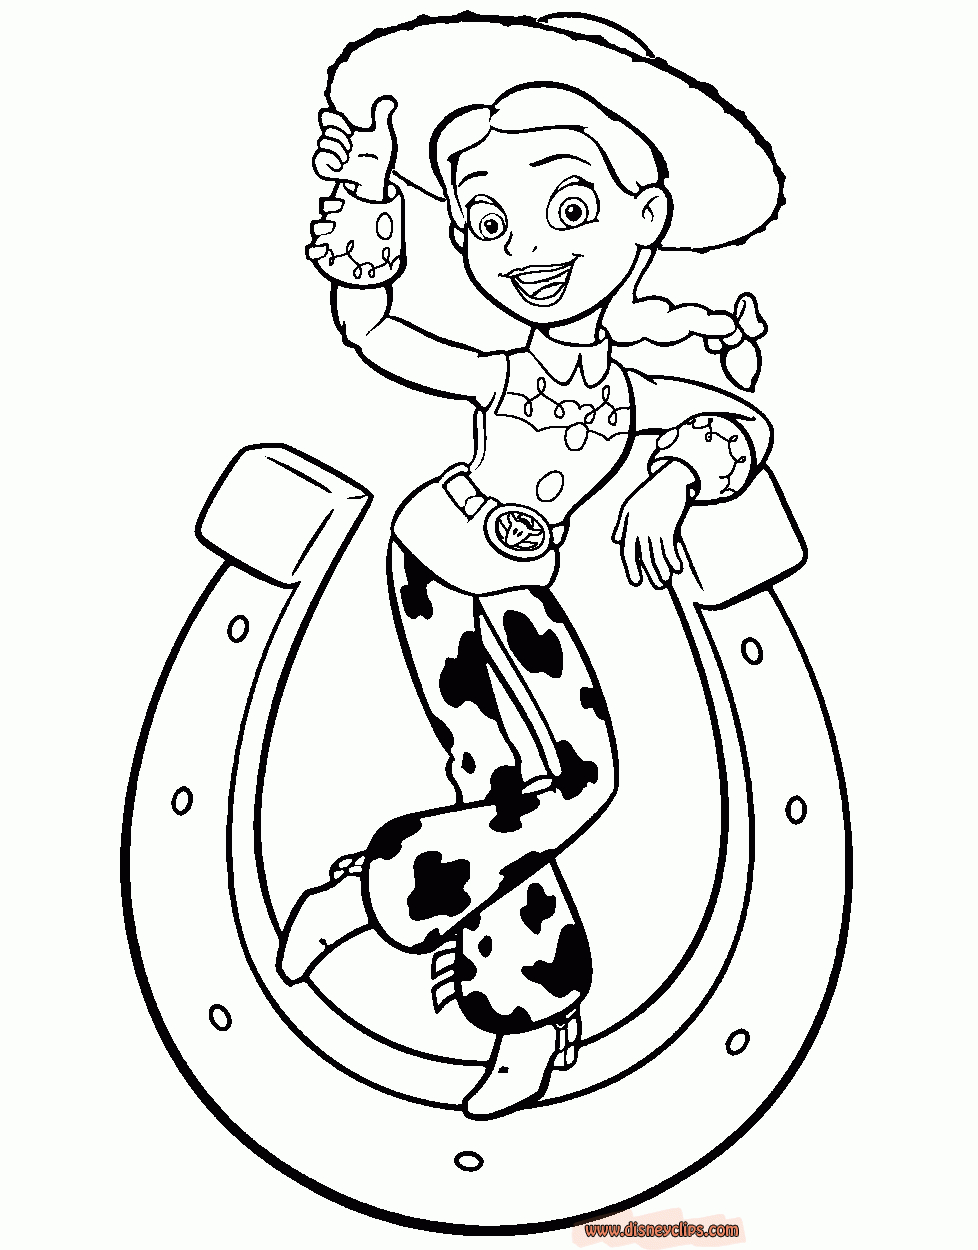 Toy Story Coloring Pages | Disney | Toy Story Coloring Pages - Free Printable Horseshoe Coloring Pages